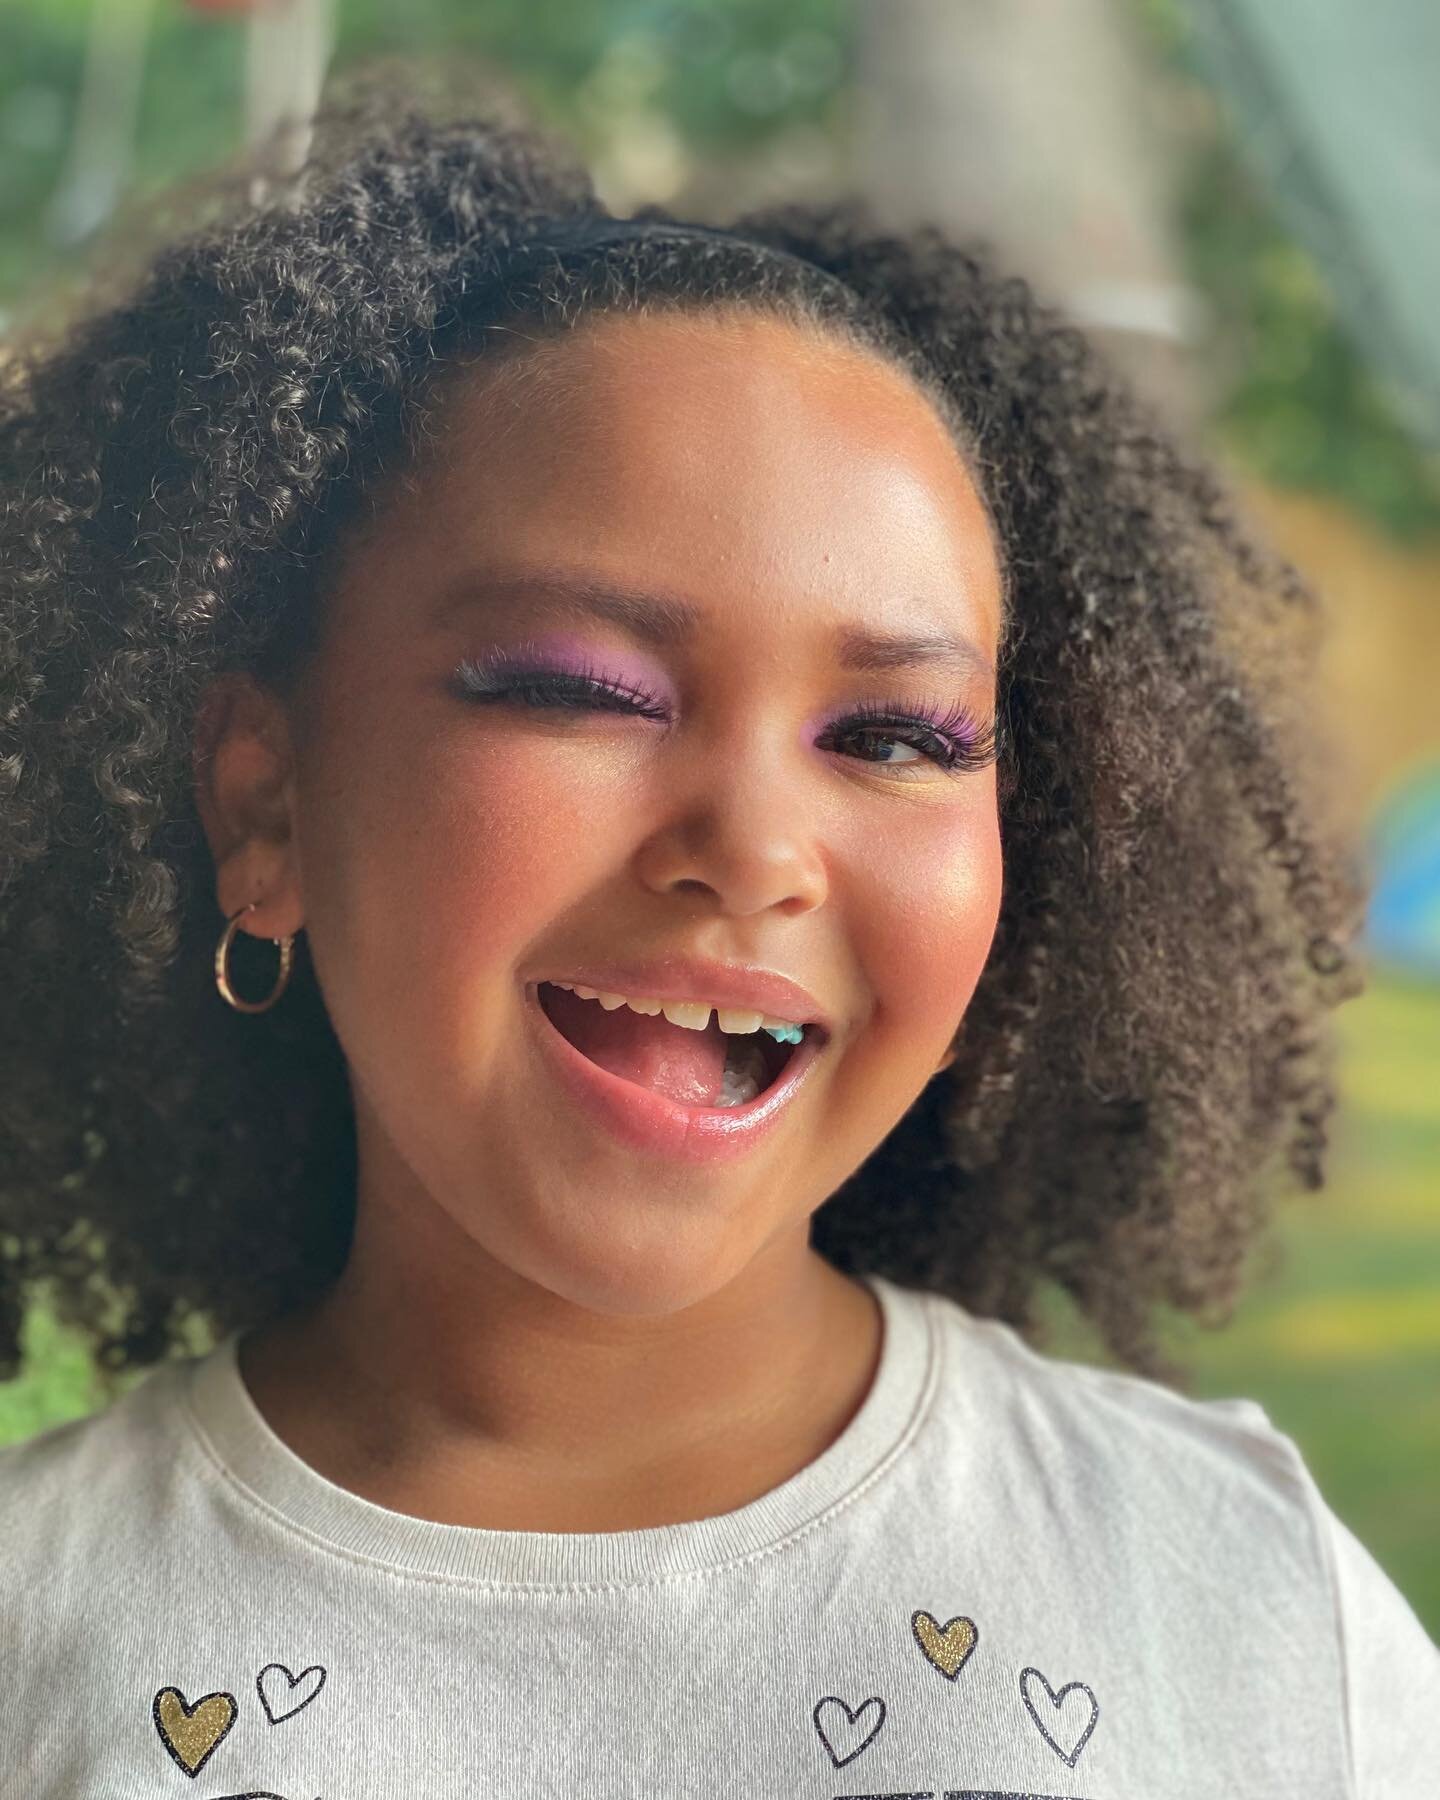 We had a great session today with our two youngest students! They did an amazing job!! 8 year olds and the future of makeup artistry!! 

Make sure you sign for our next class!! https://www.jjamalbeauty.com/events-1

#jjamalbeauty #jjamalbeautyhappyho